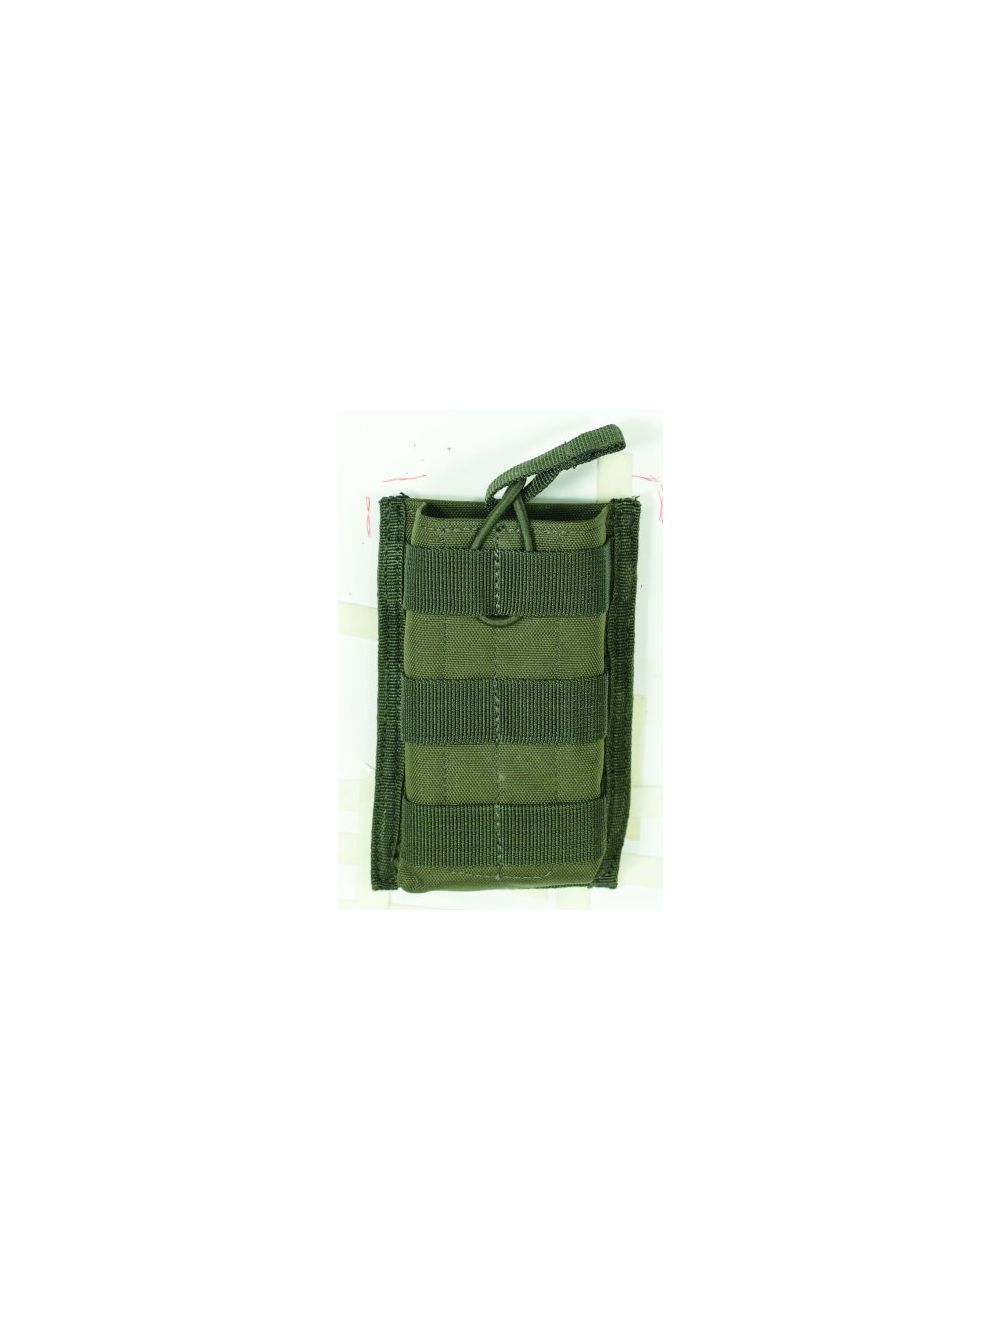 M4/M16 Open Top Mag Pouch W/ Bungee System